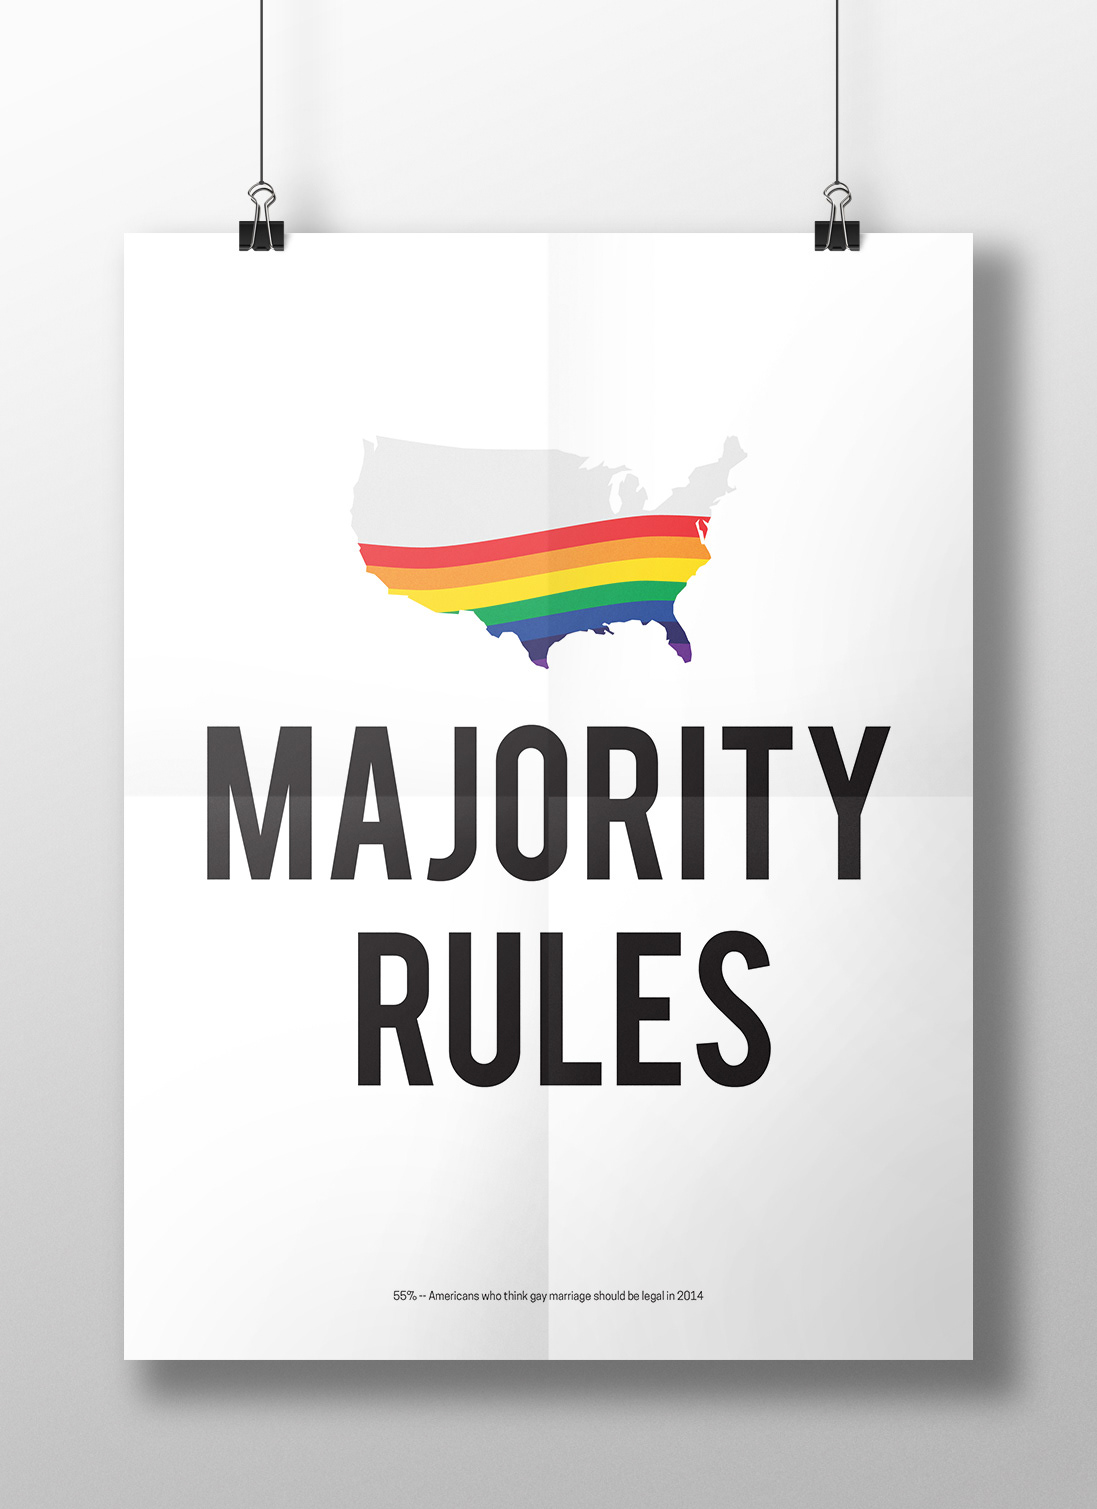 rights equality marriage equality LGBT gay rights